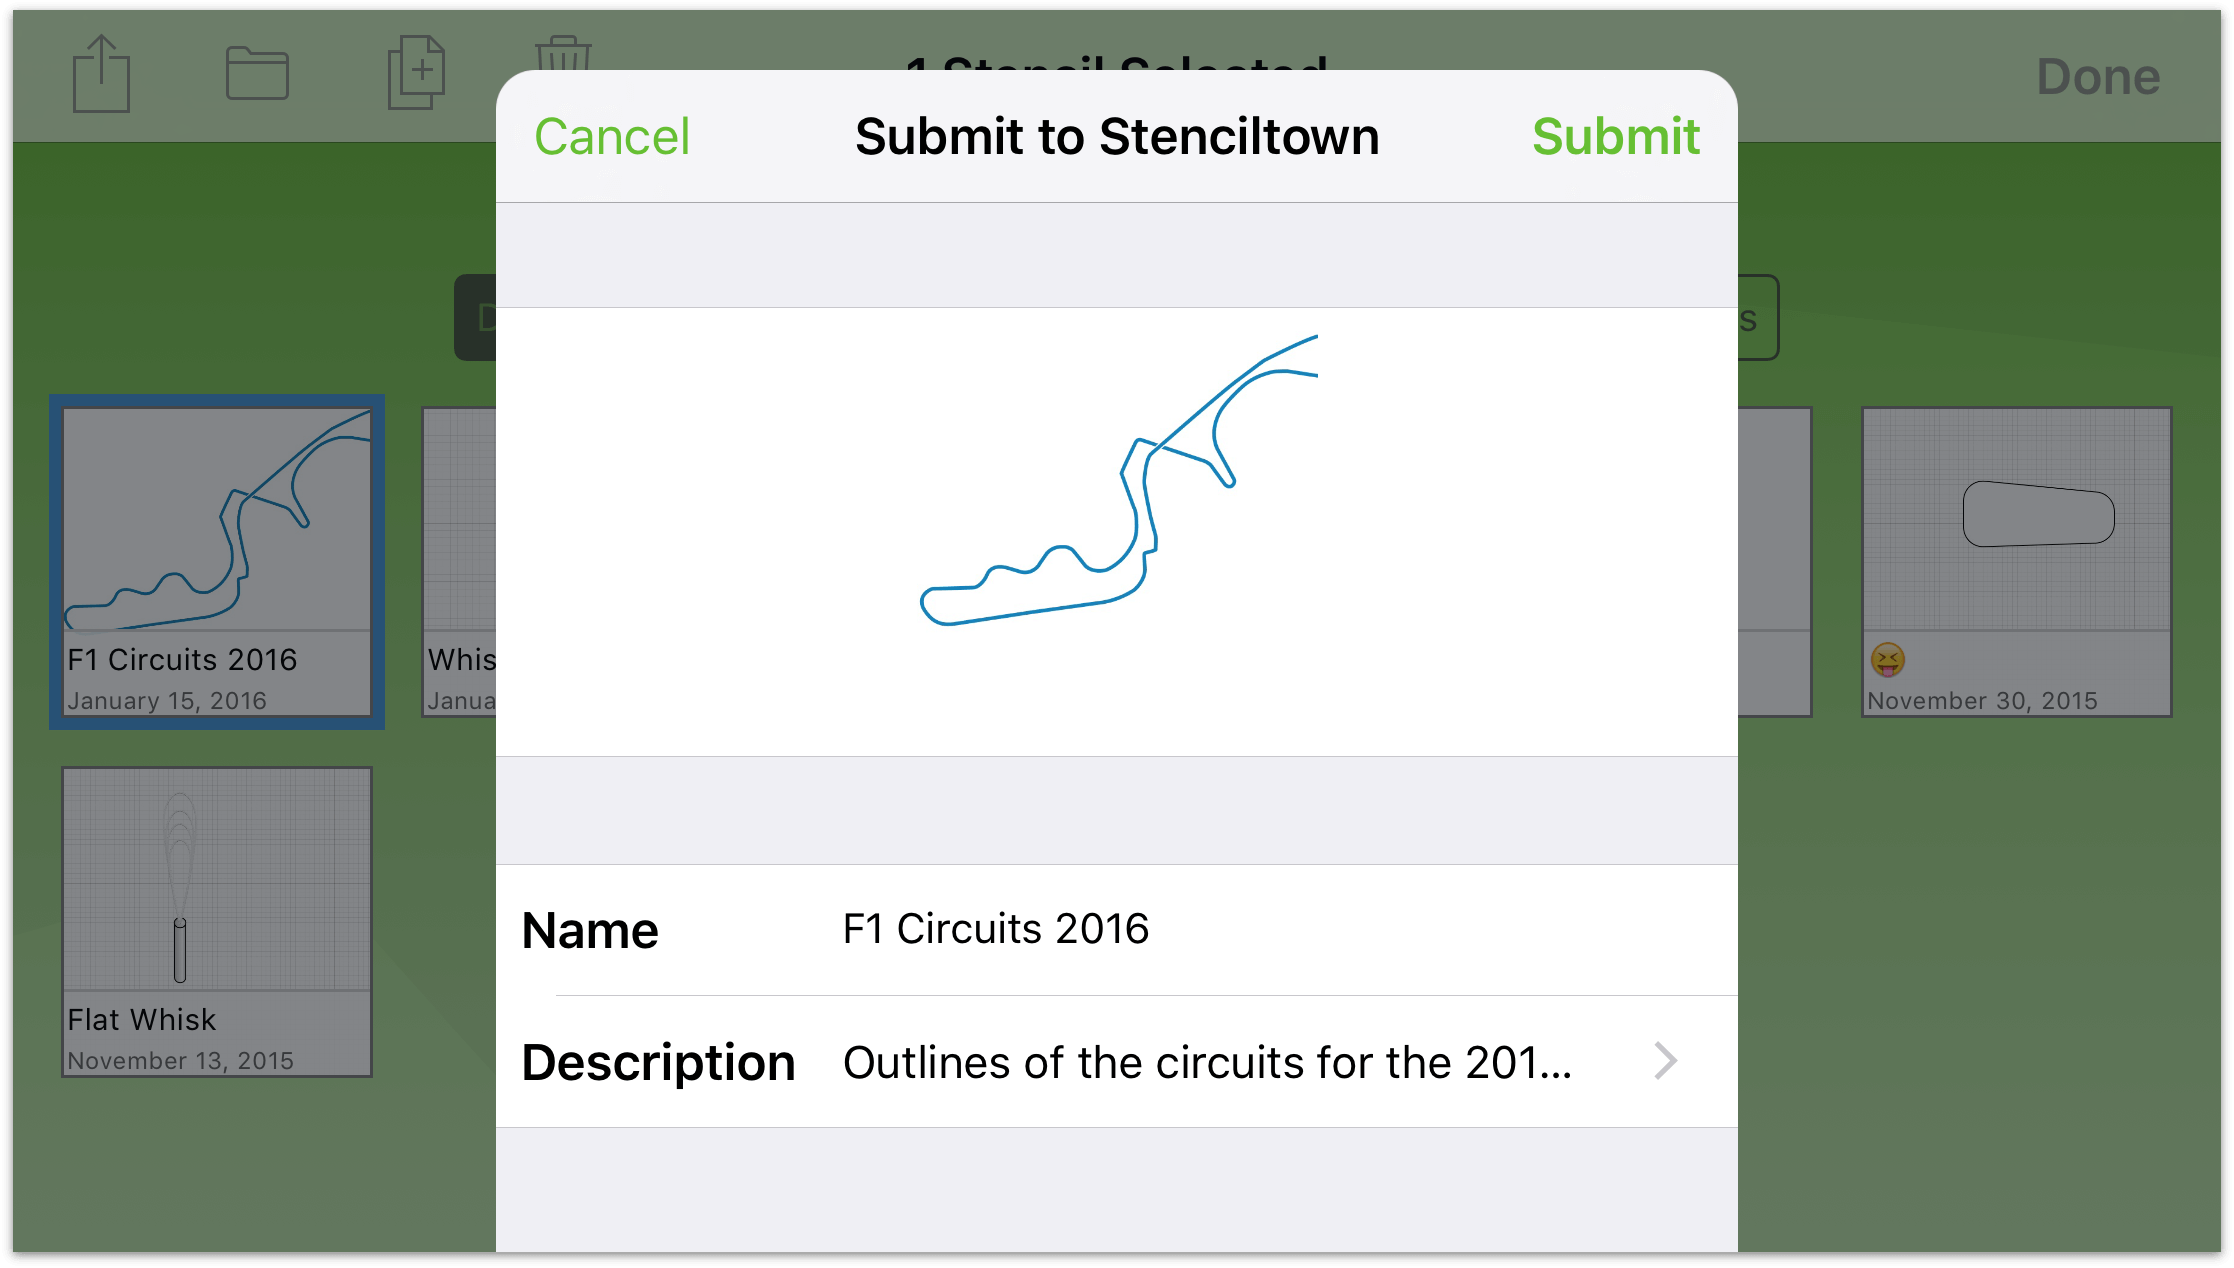 Use the form to enter details about the stencil